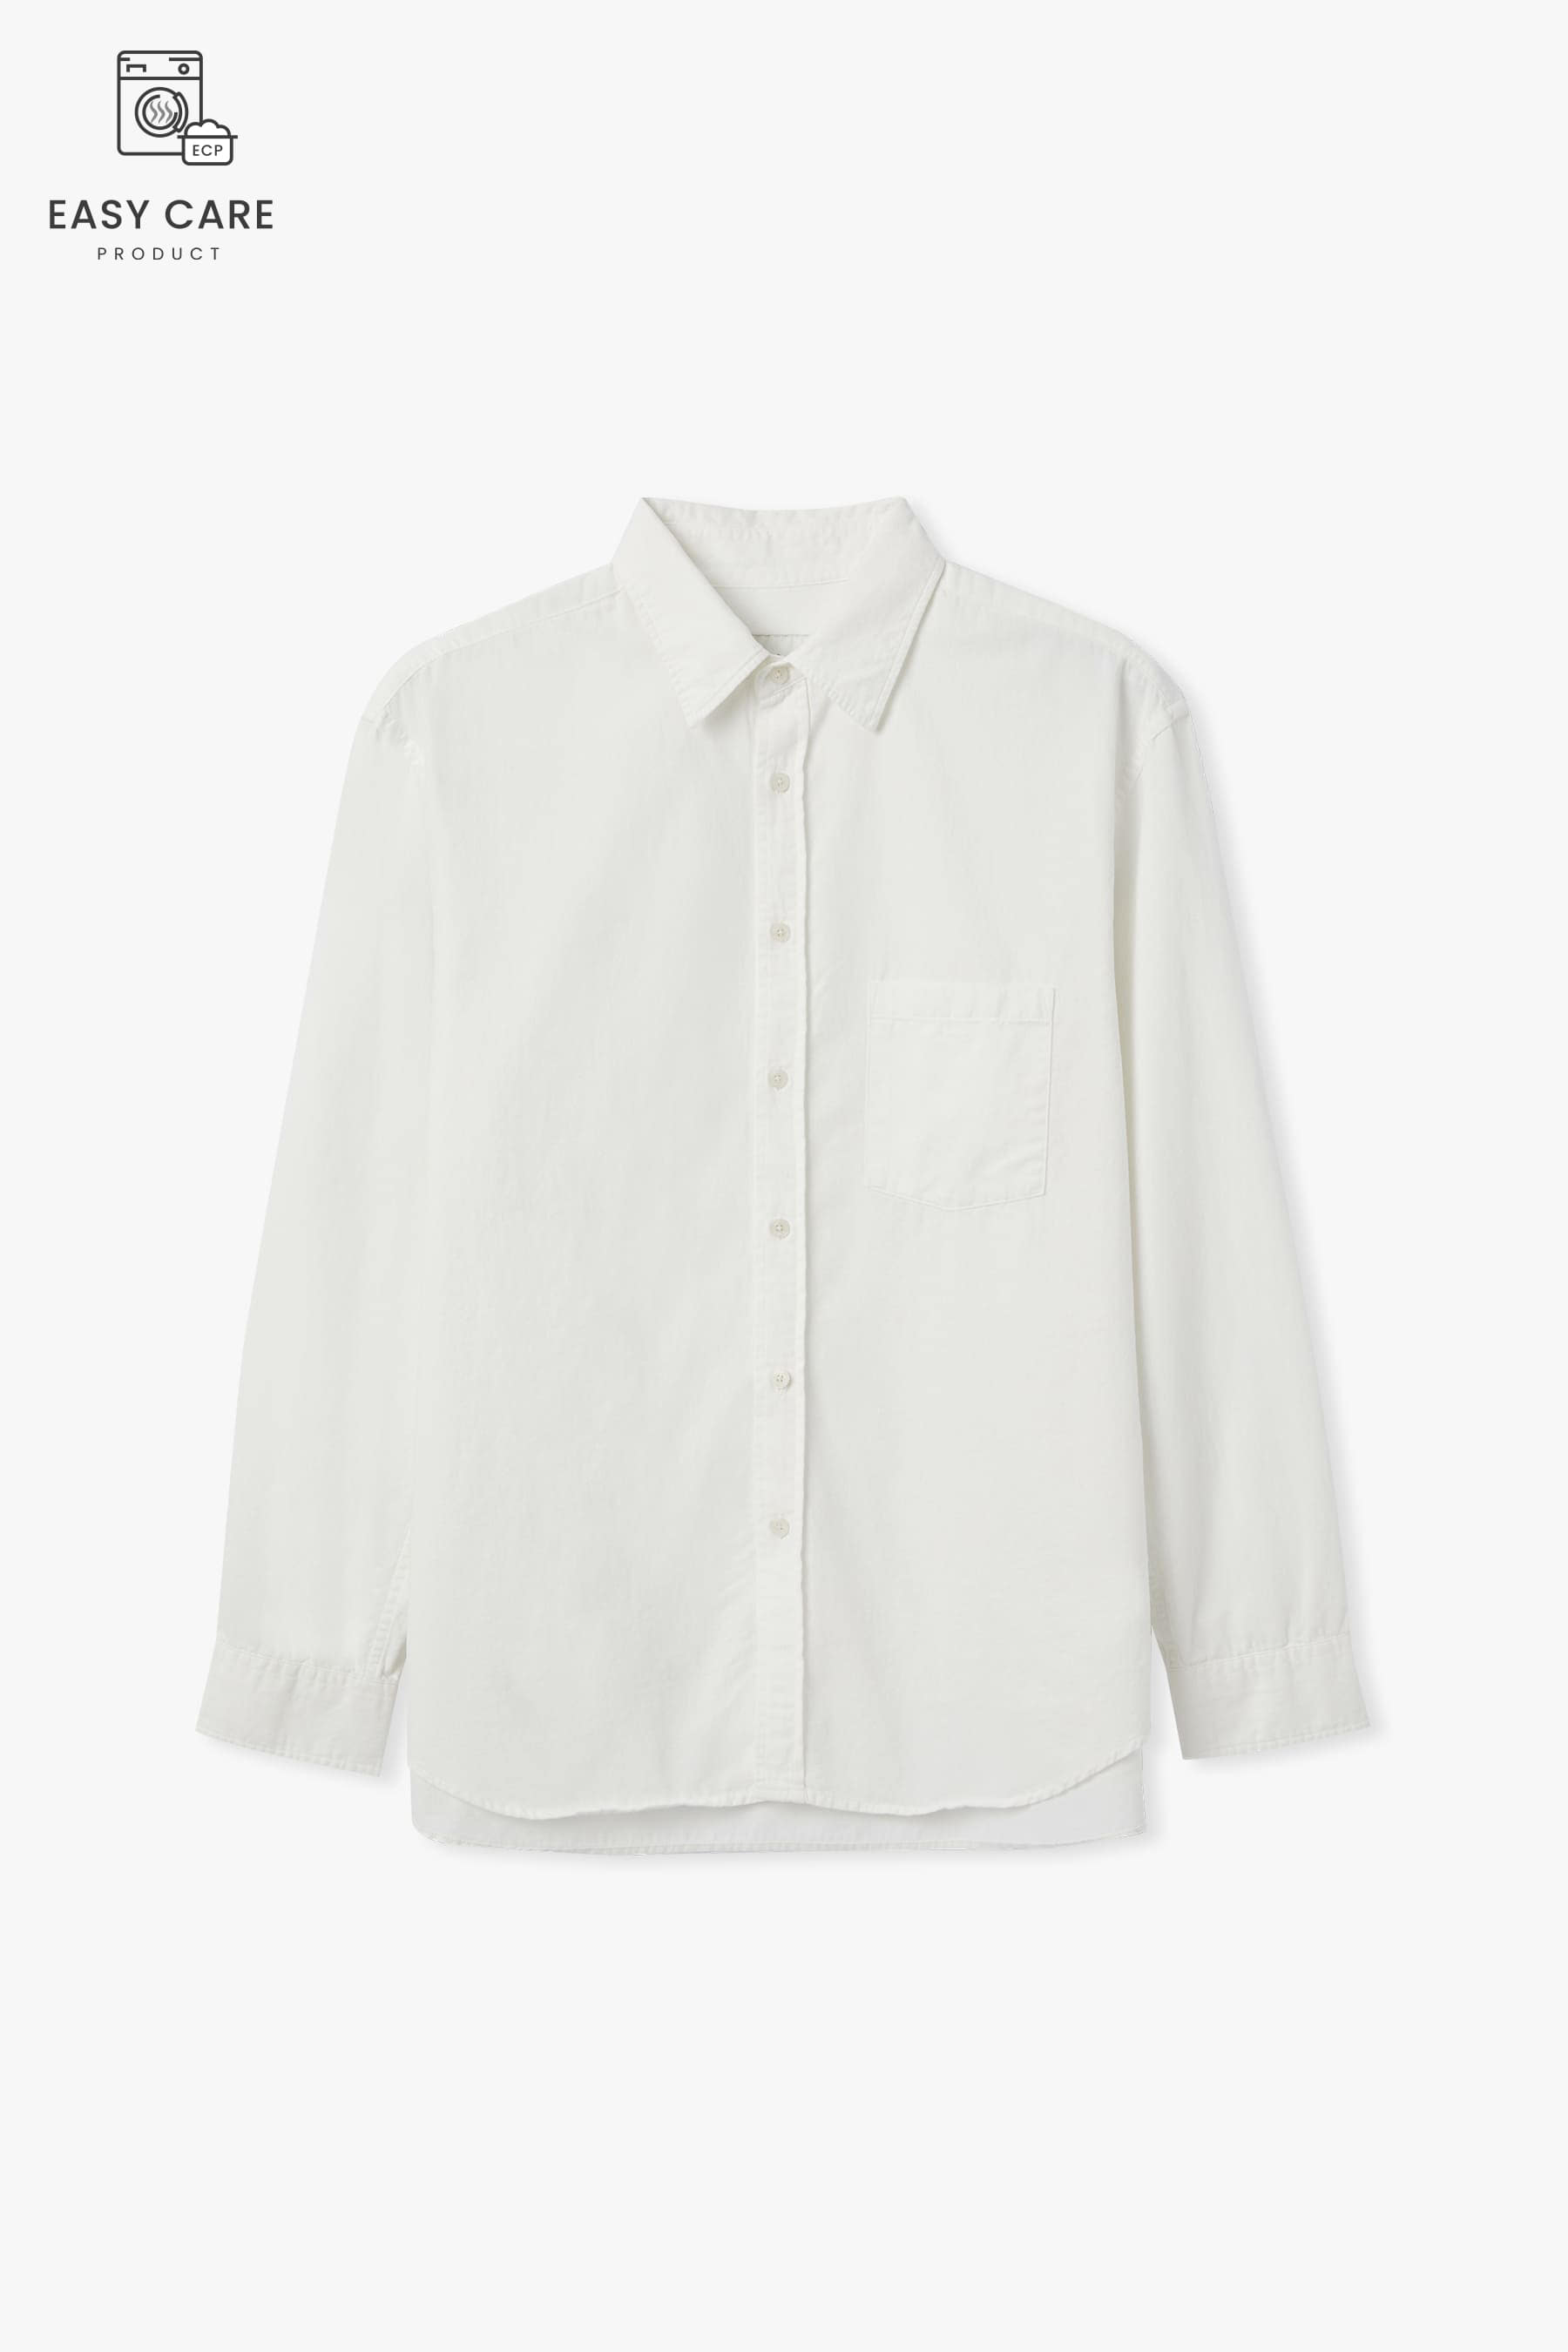 OFF WHITE YRS POIKA COTTON DRILL WASHED SHIRTS CLASSIC FIT (ECP GARMENT PROCESS)